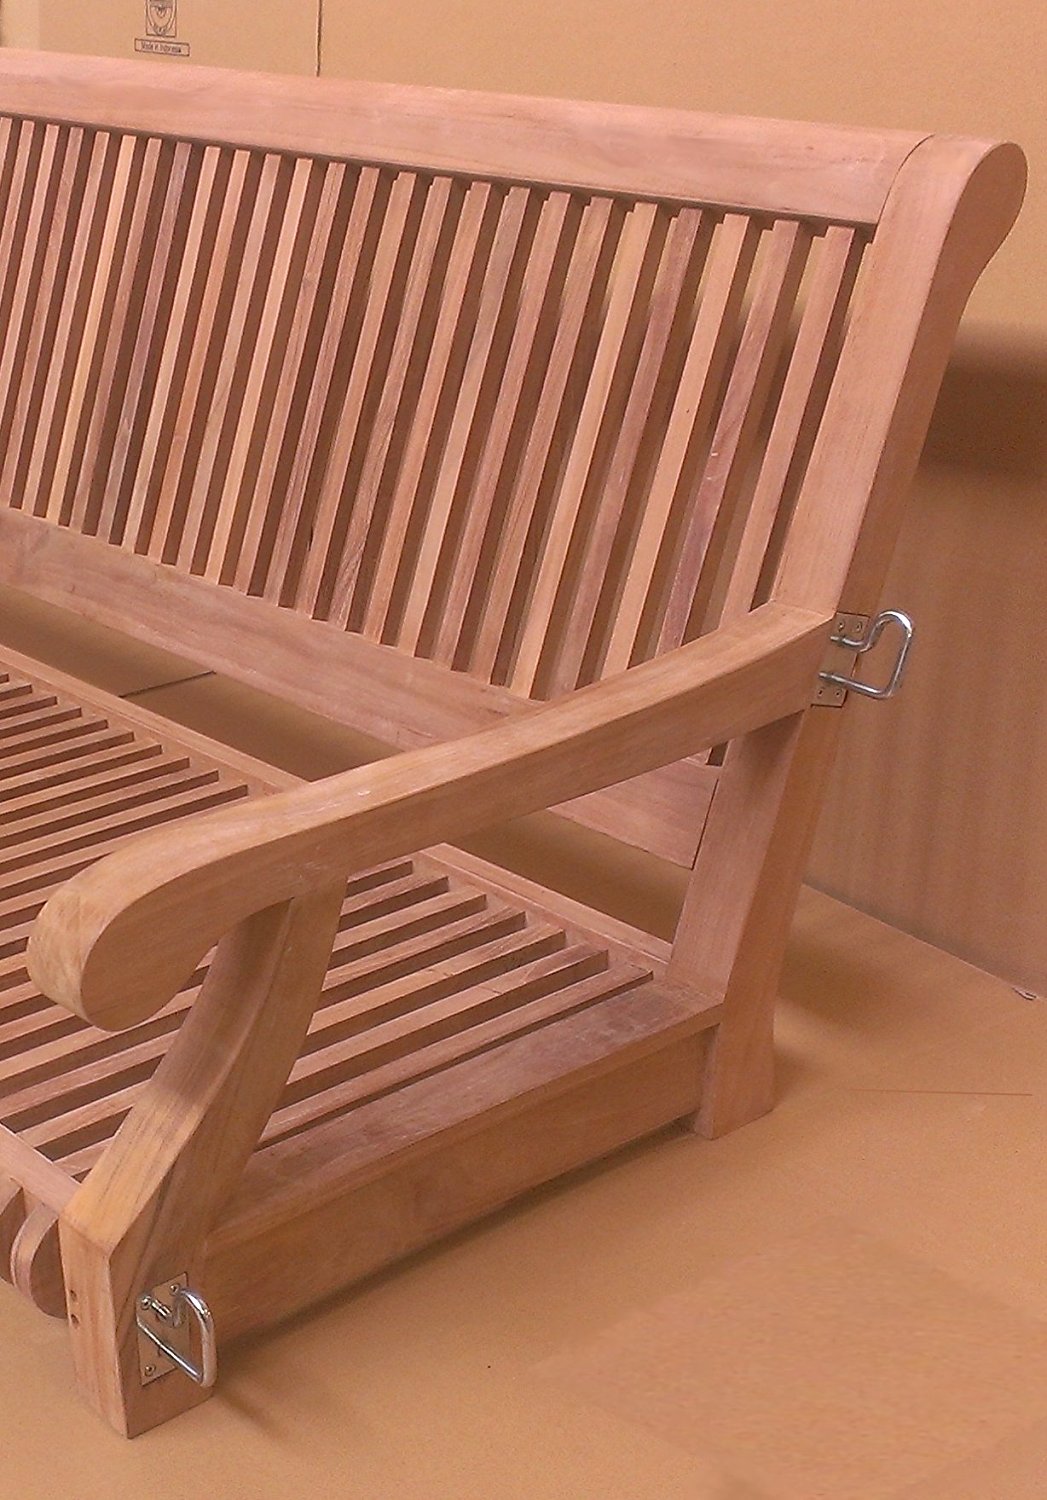 Teak Porch Swing! Reviews and Information - OutsideModern